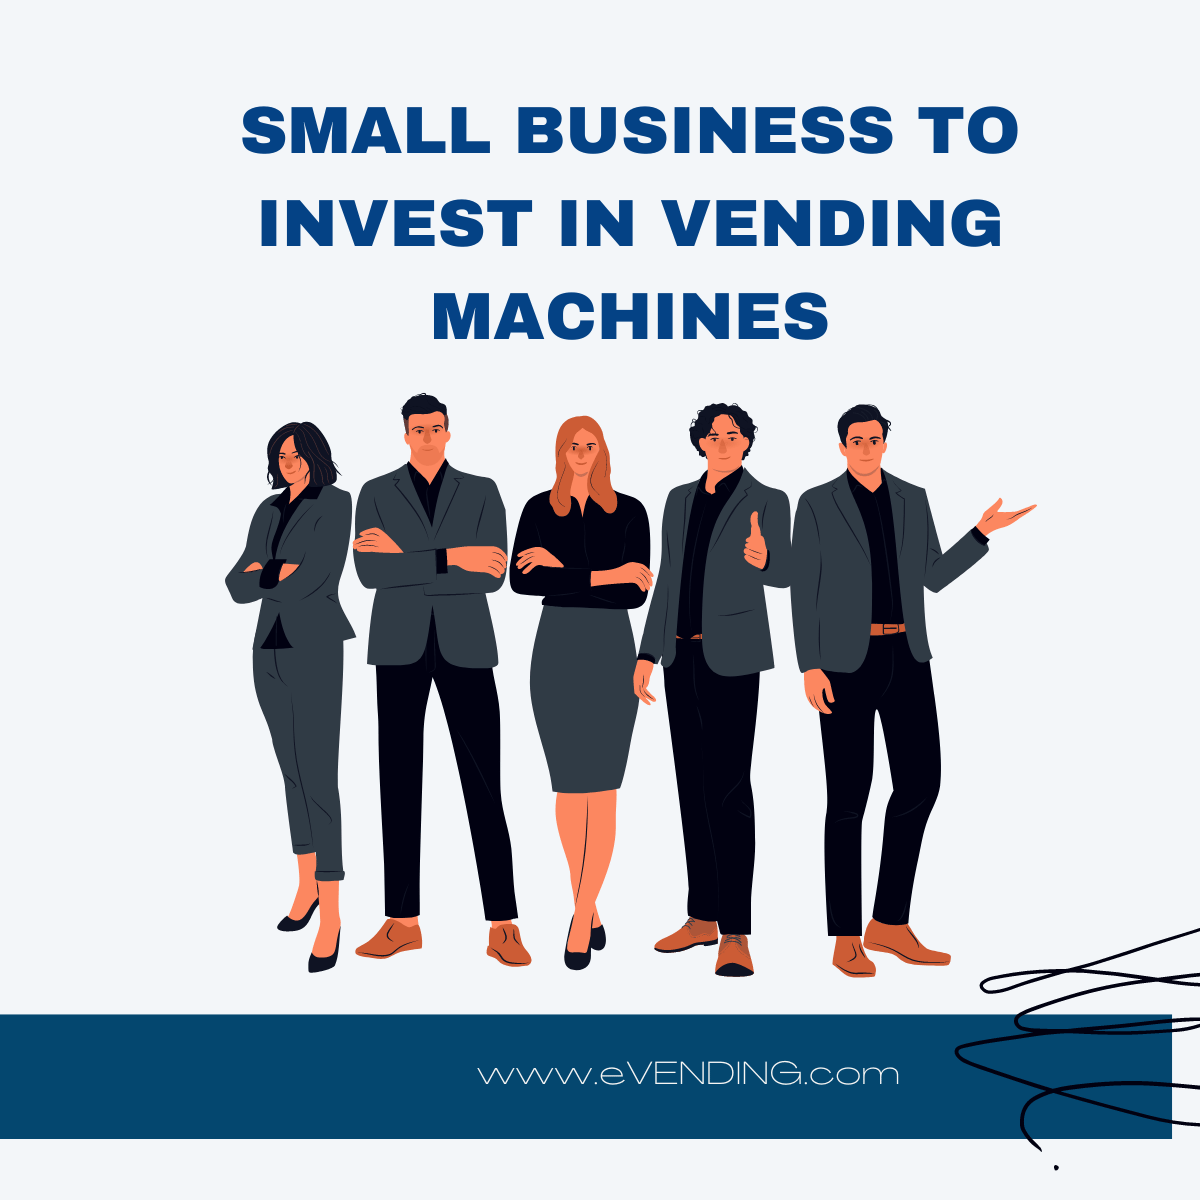 REASONS FOR YOUR SMALL BUSINESS TO INVEST IN VENDING MACHINES